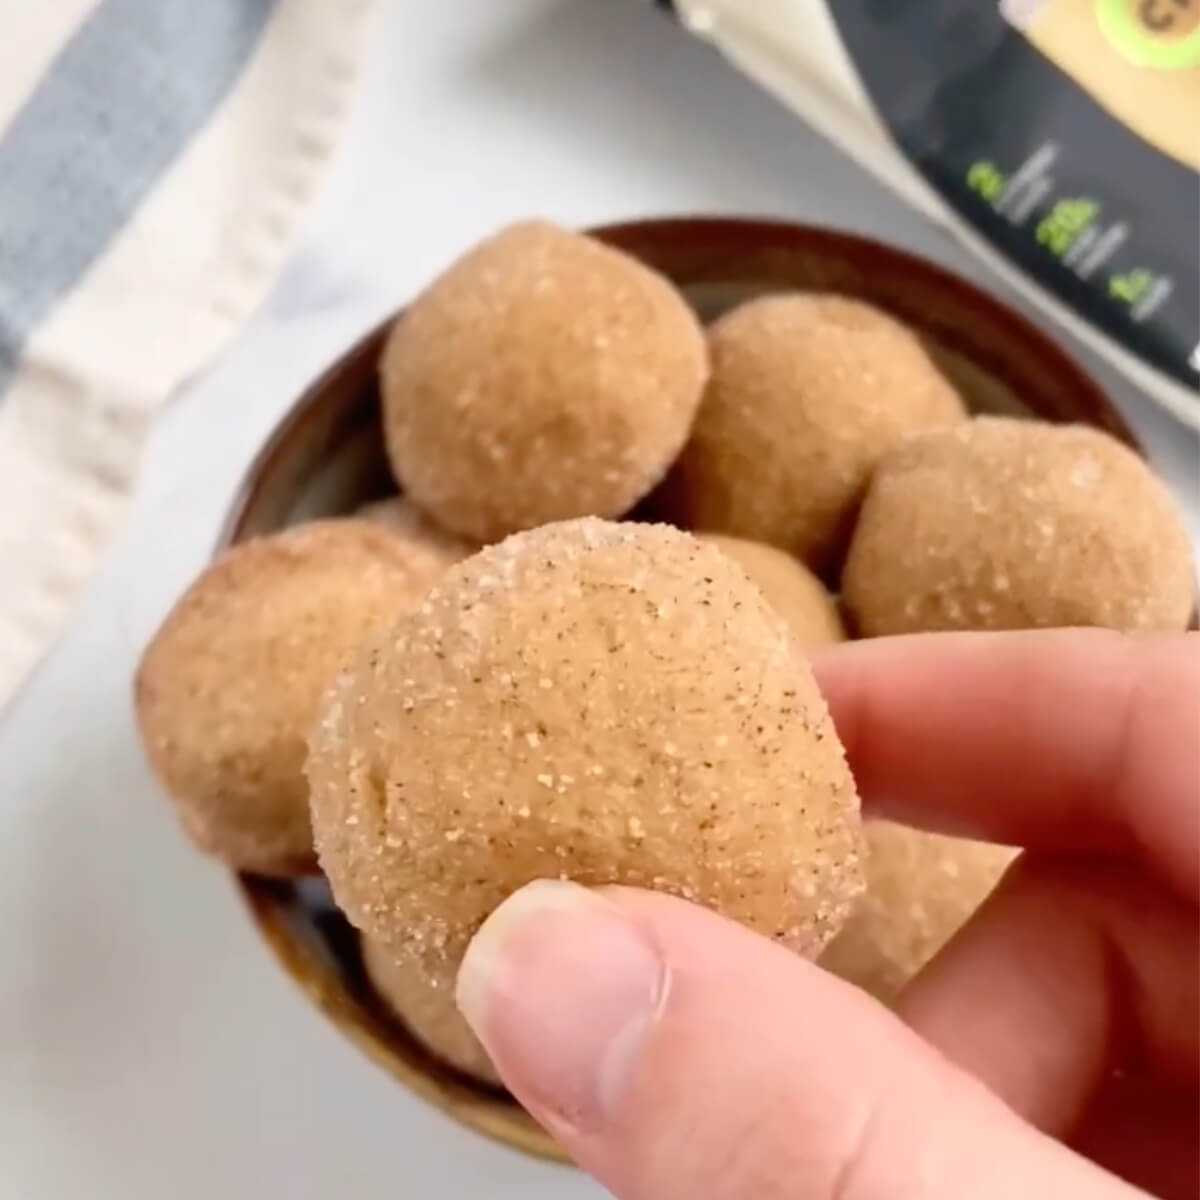 Bite sized ball of protein snickerdoodles